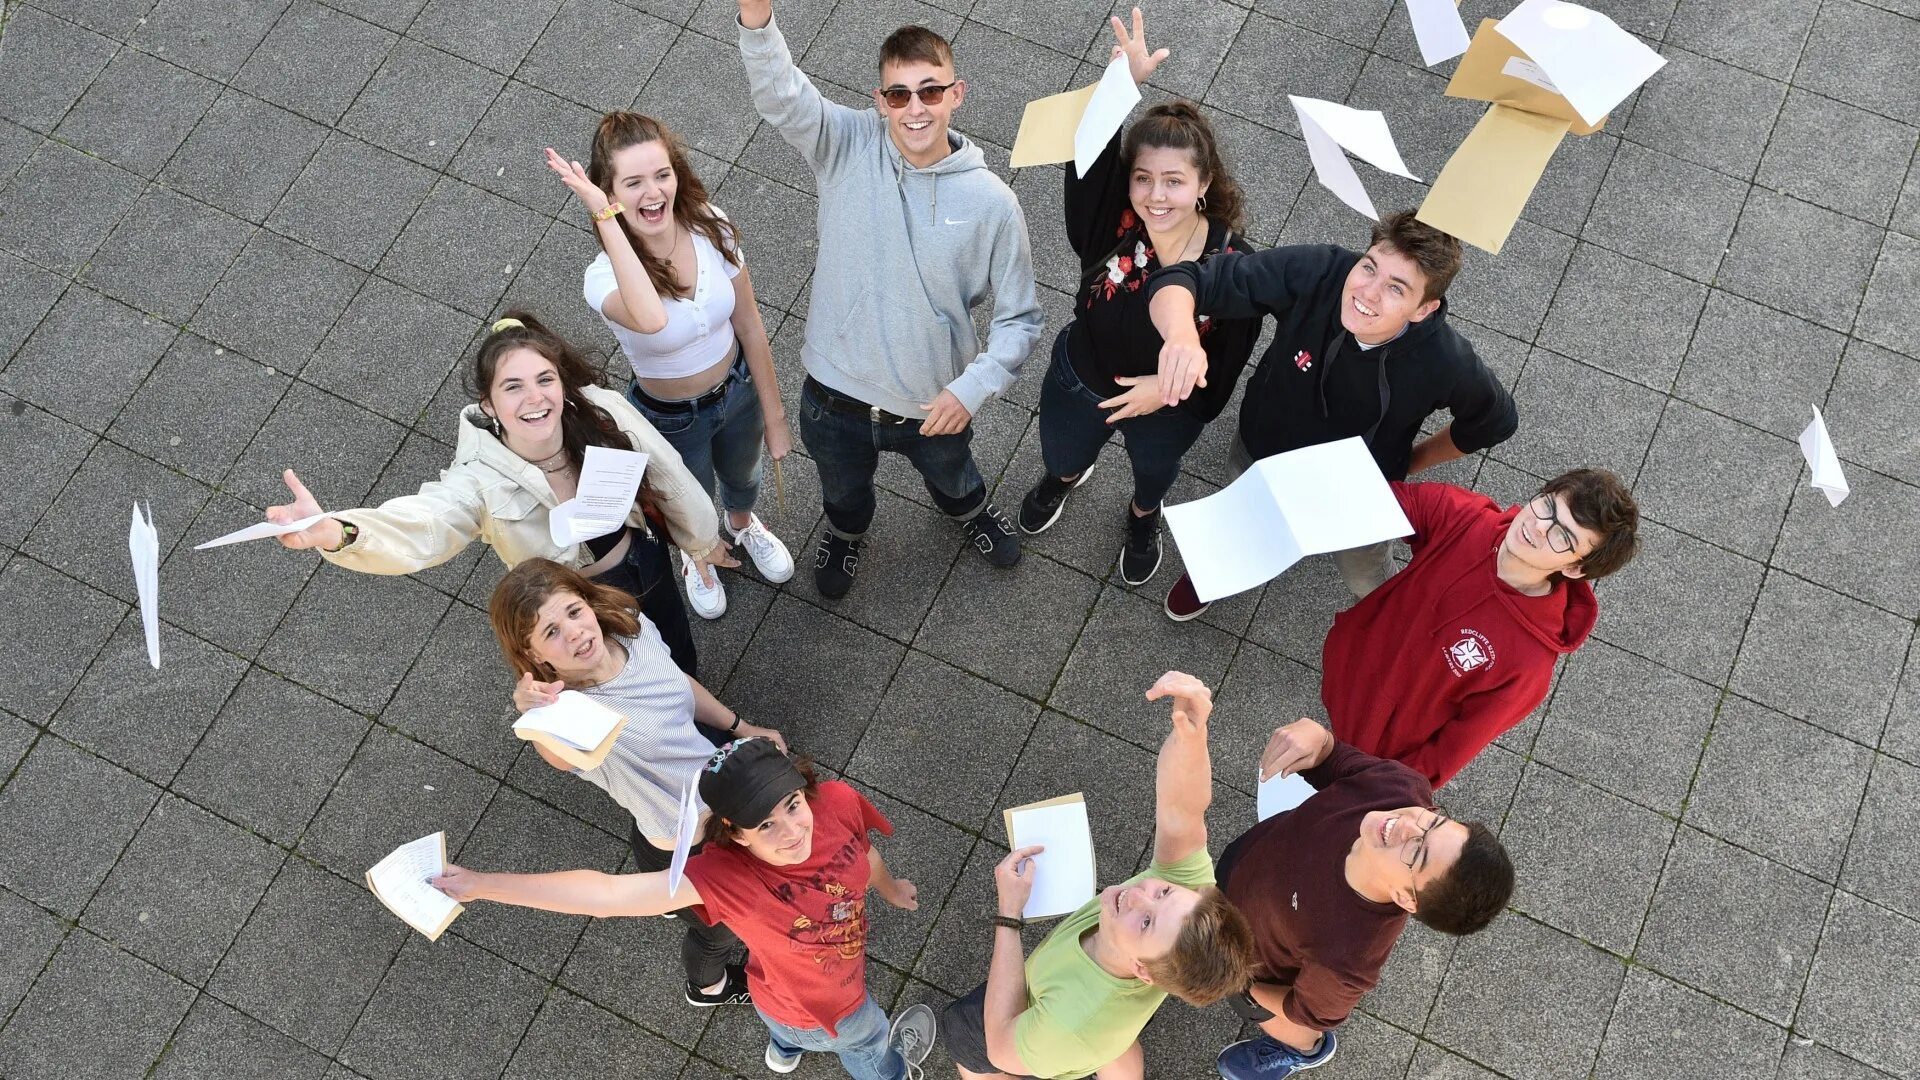 Student papers. The Levels. A Level Exam. Students celebrate Result. A Level Results.